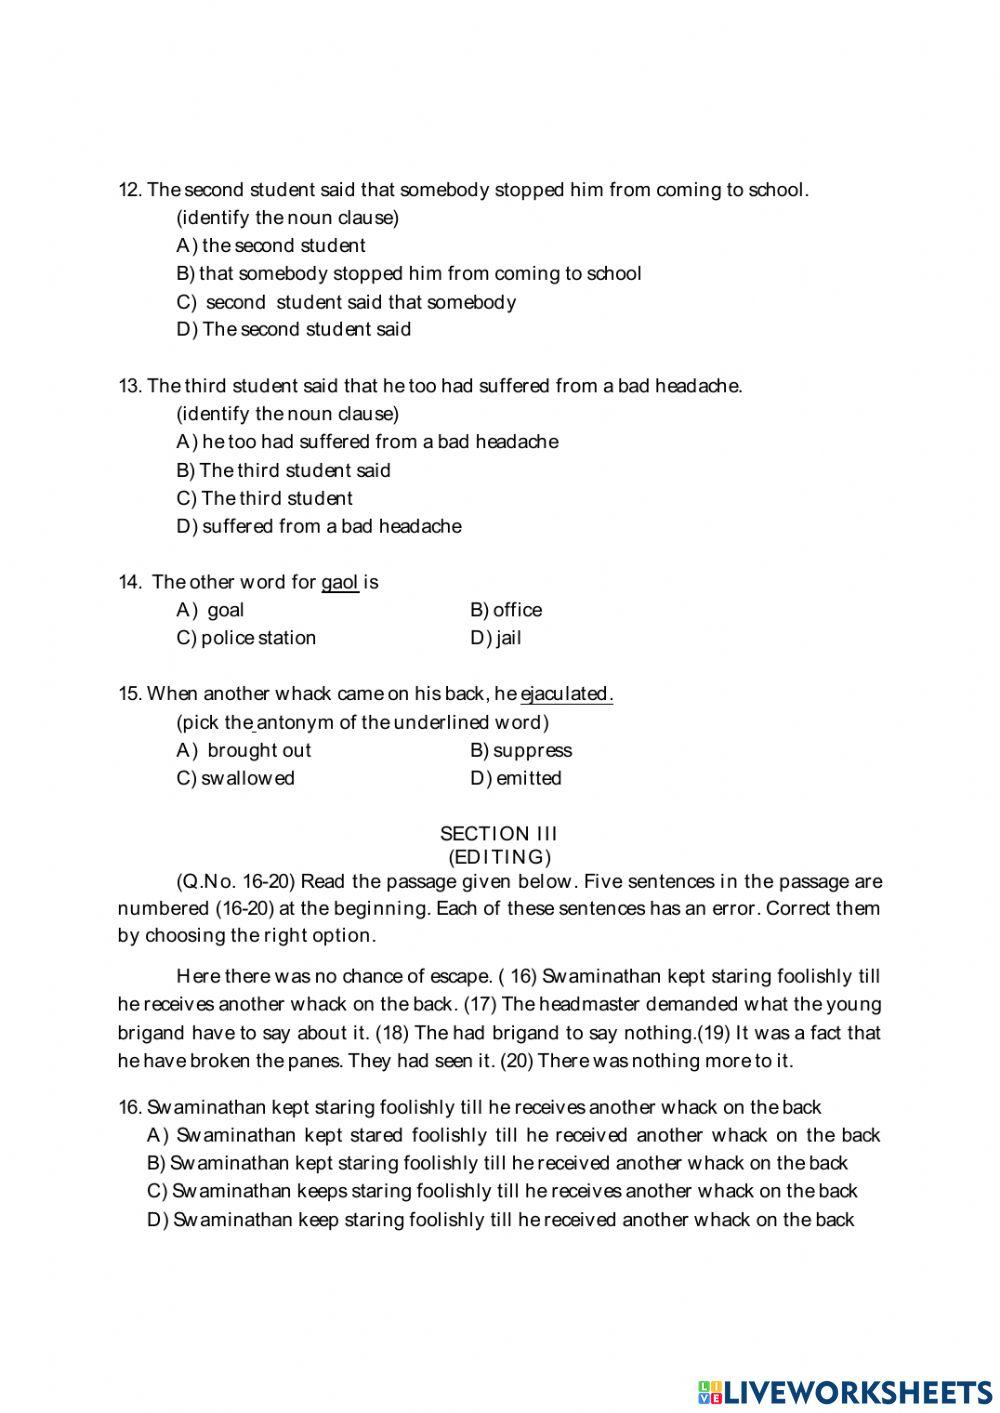 9th class Swami Is Expelled From School-worksheet-3